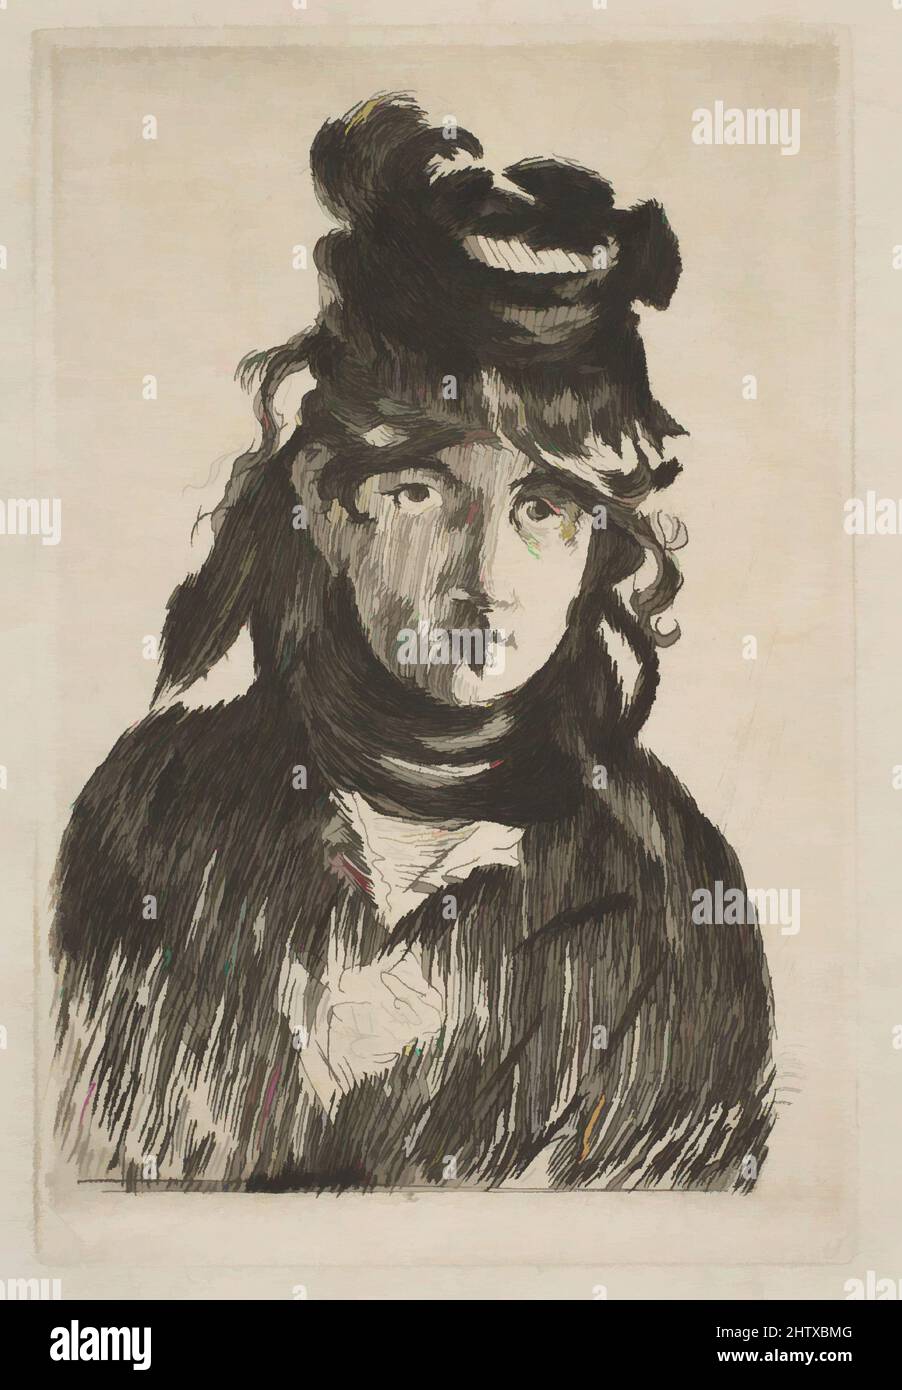 Art inspired by Berthe Morisot, 1872, Etching and drypoint on laid paper, first state of three, plate: 4 11/16 x 3 1/8in. (11.9 x 7.9cm), Prints, Édouard Manet (French, Paris 1832–1883 Paris, Classic works modernized by Artotop with a splash of modernity. Shapes, color and value, eye-catching visual impact on art. Emotions through freedom of artworks in a contemporary way. A timeless message pursuing a wildly creative new direction. Artists turning to the digital medium and creating the Artotop NFT Stock Photo